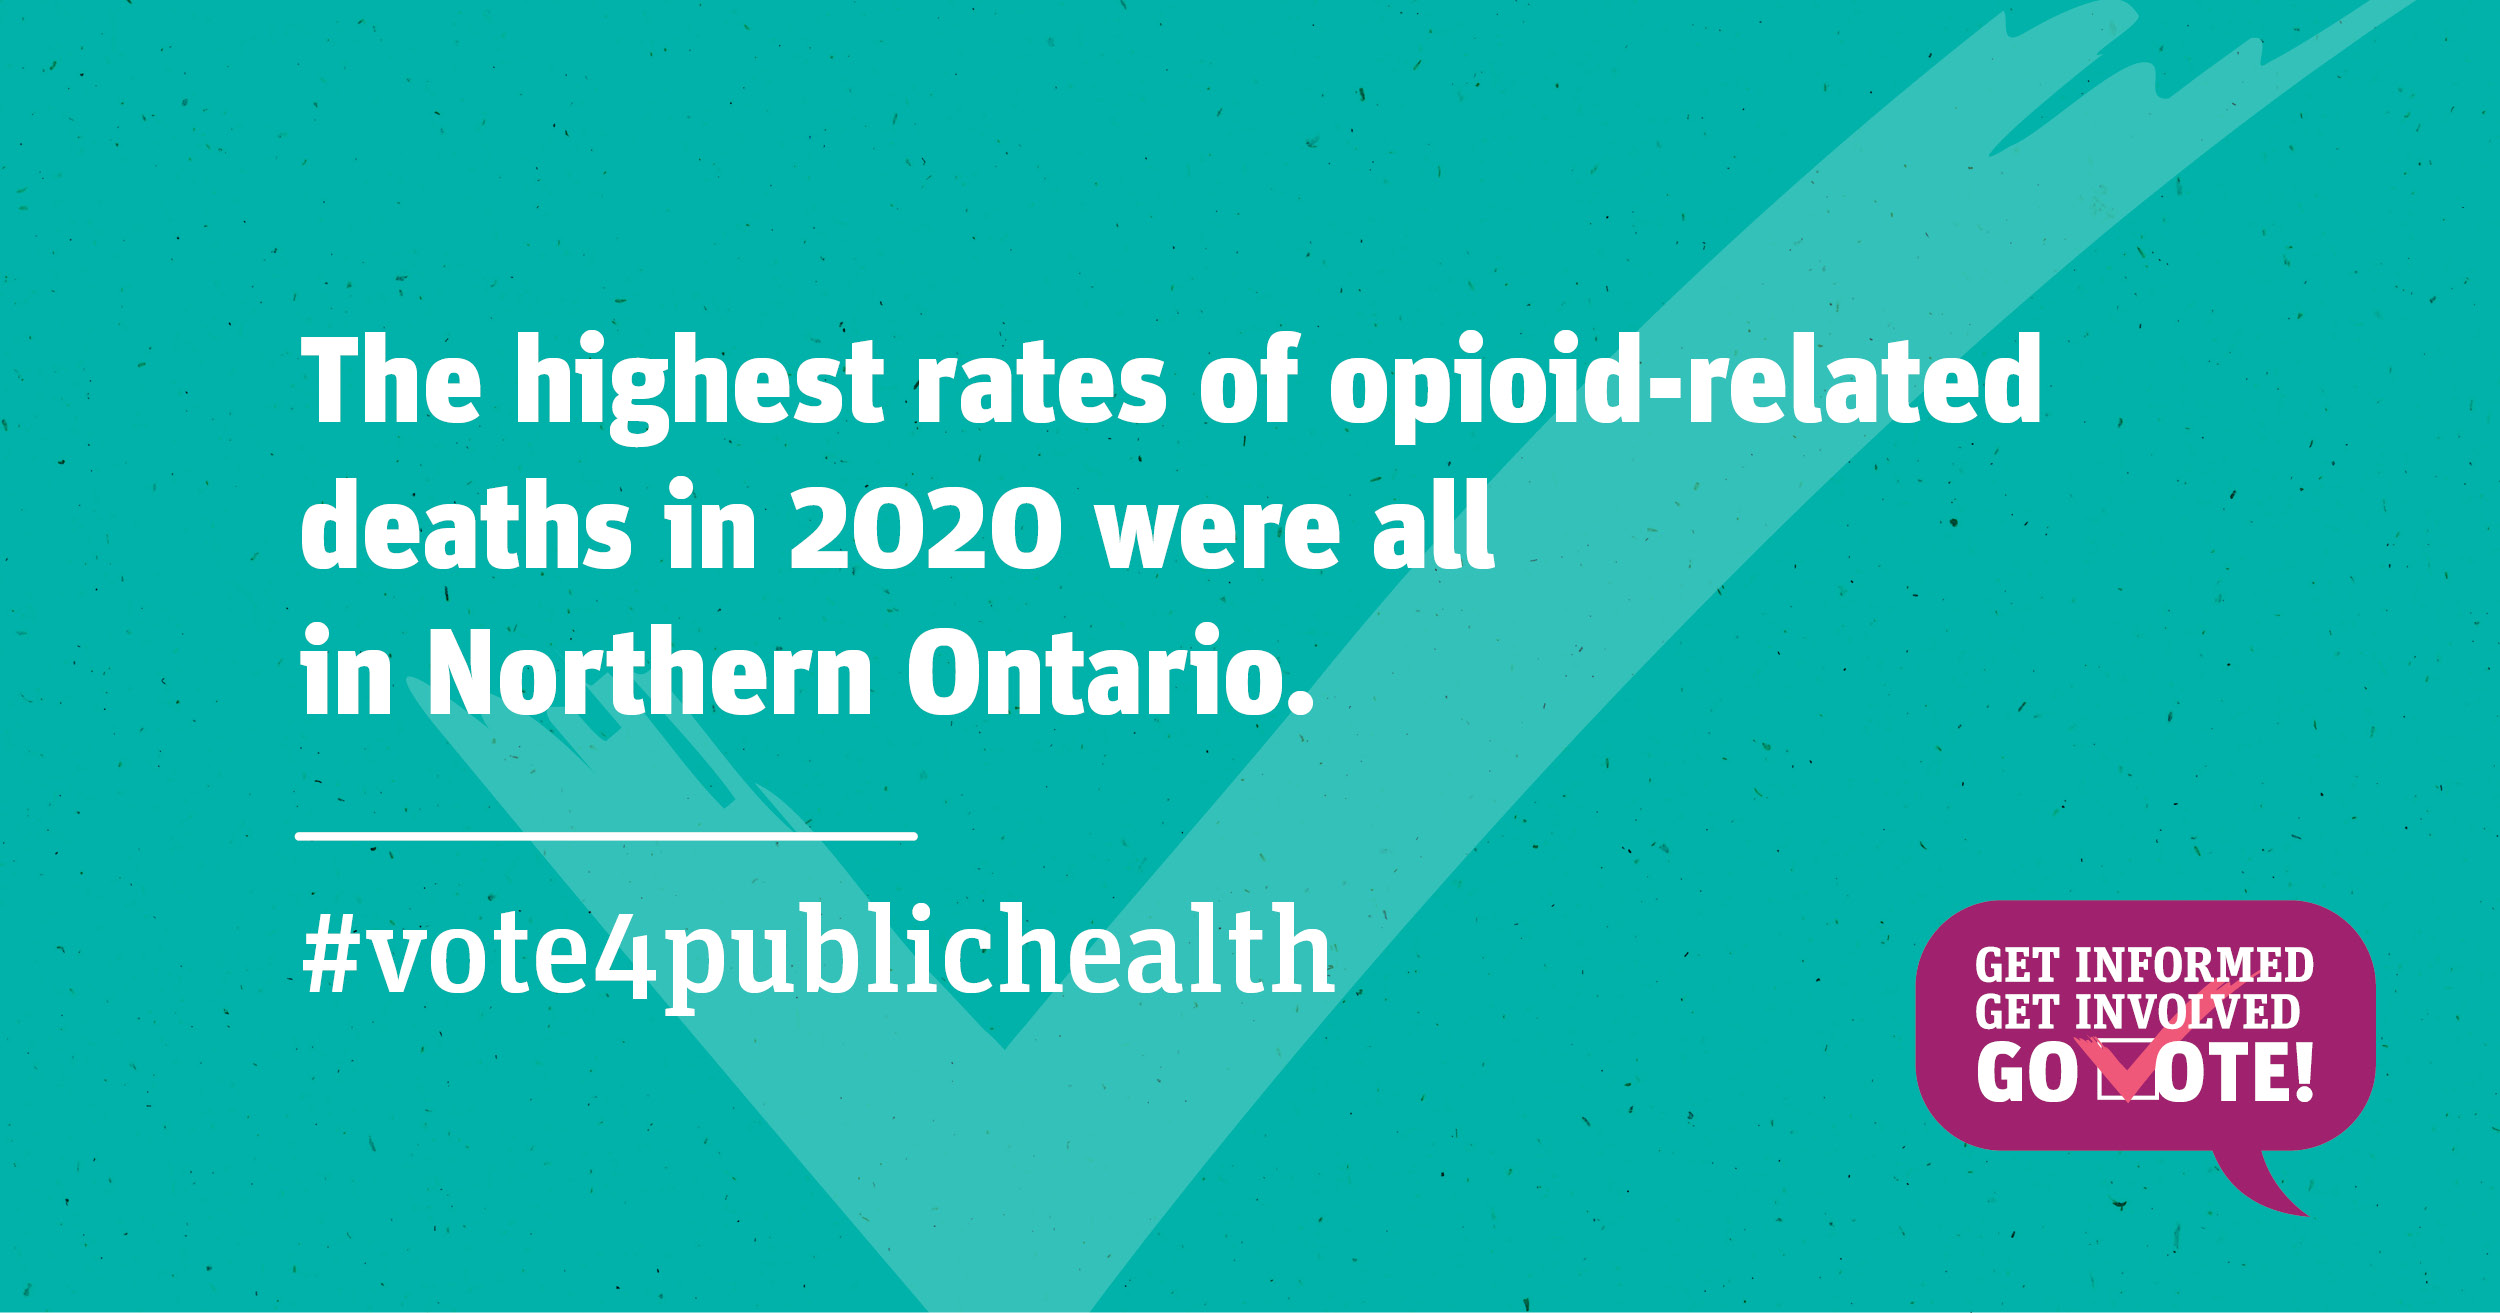 The highest rates of opioid-related deaths in 2020 were all in Northern Ontario.